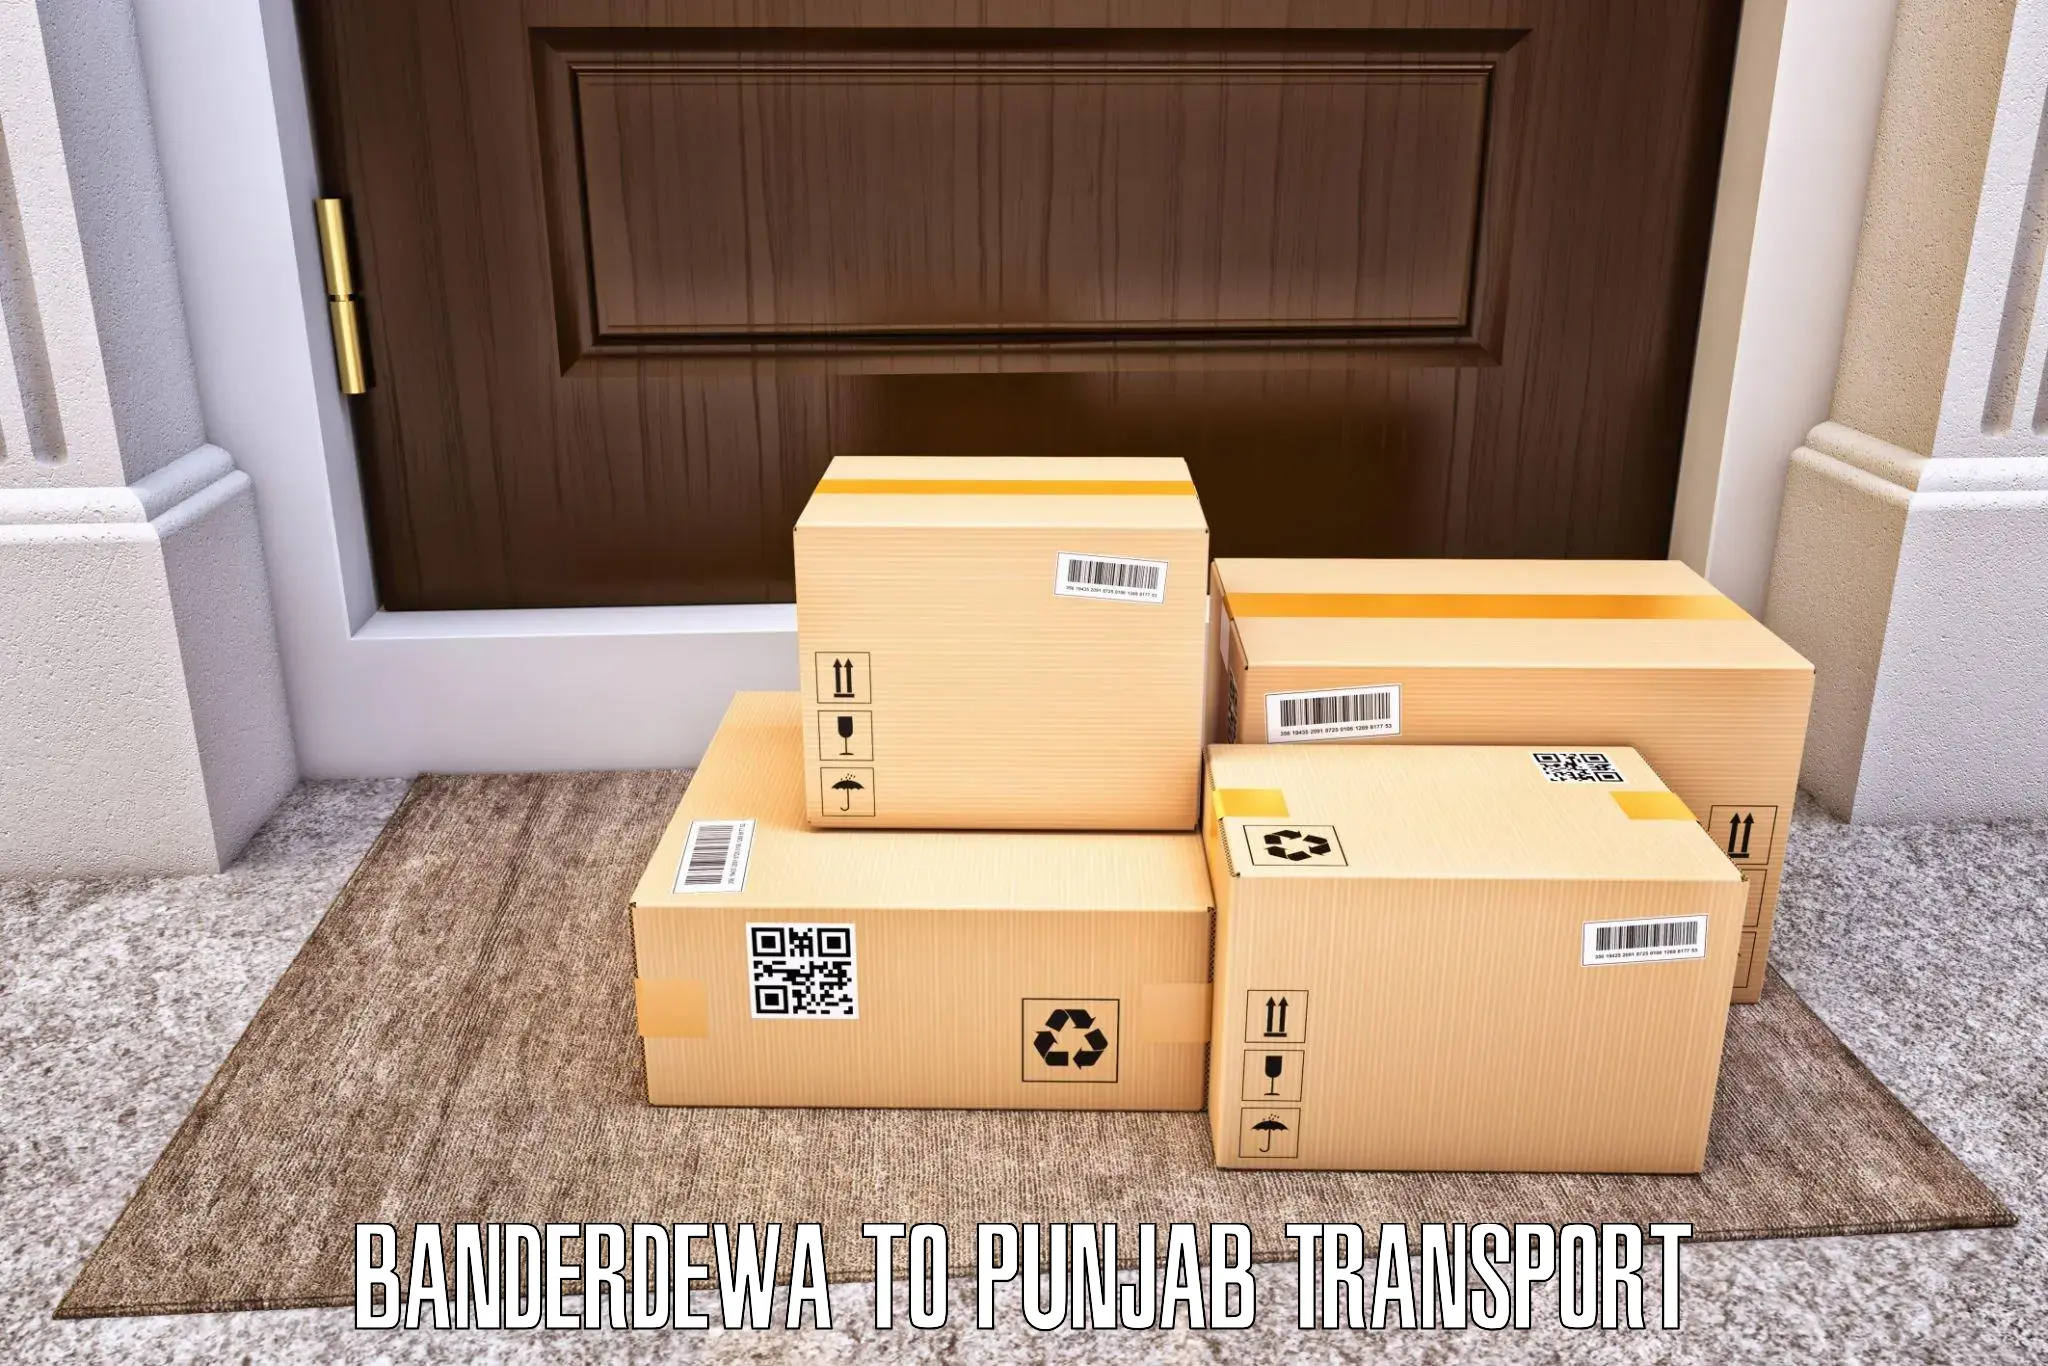 Daily parcel service transport Banderdewa to Malout